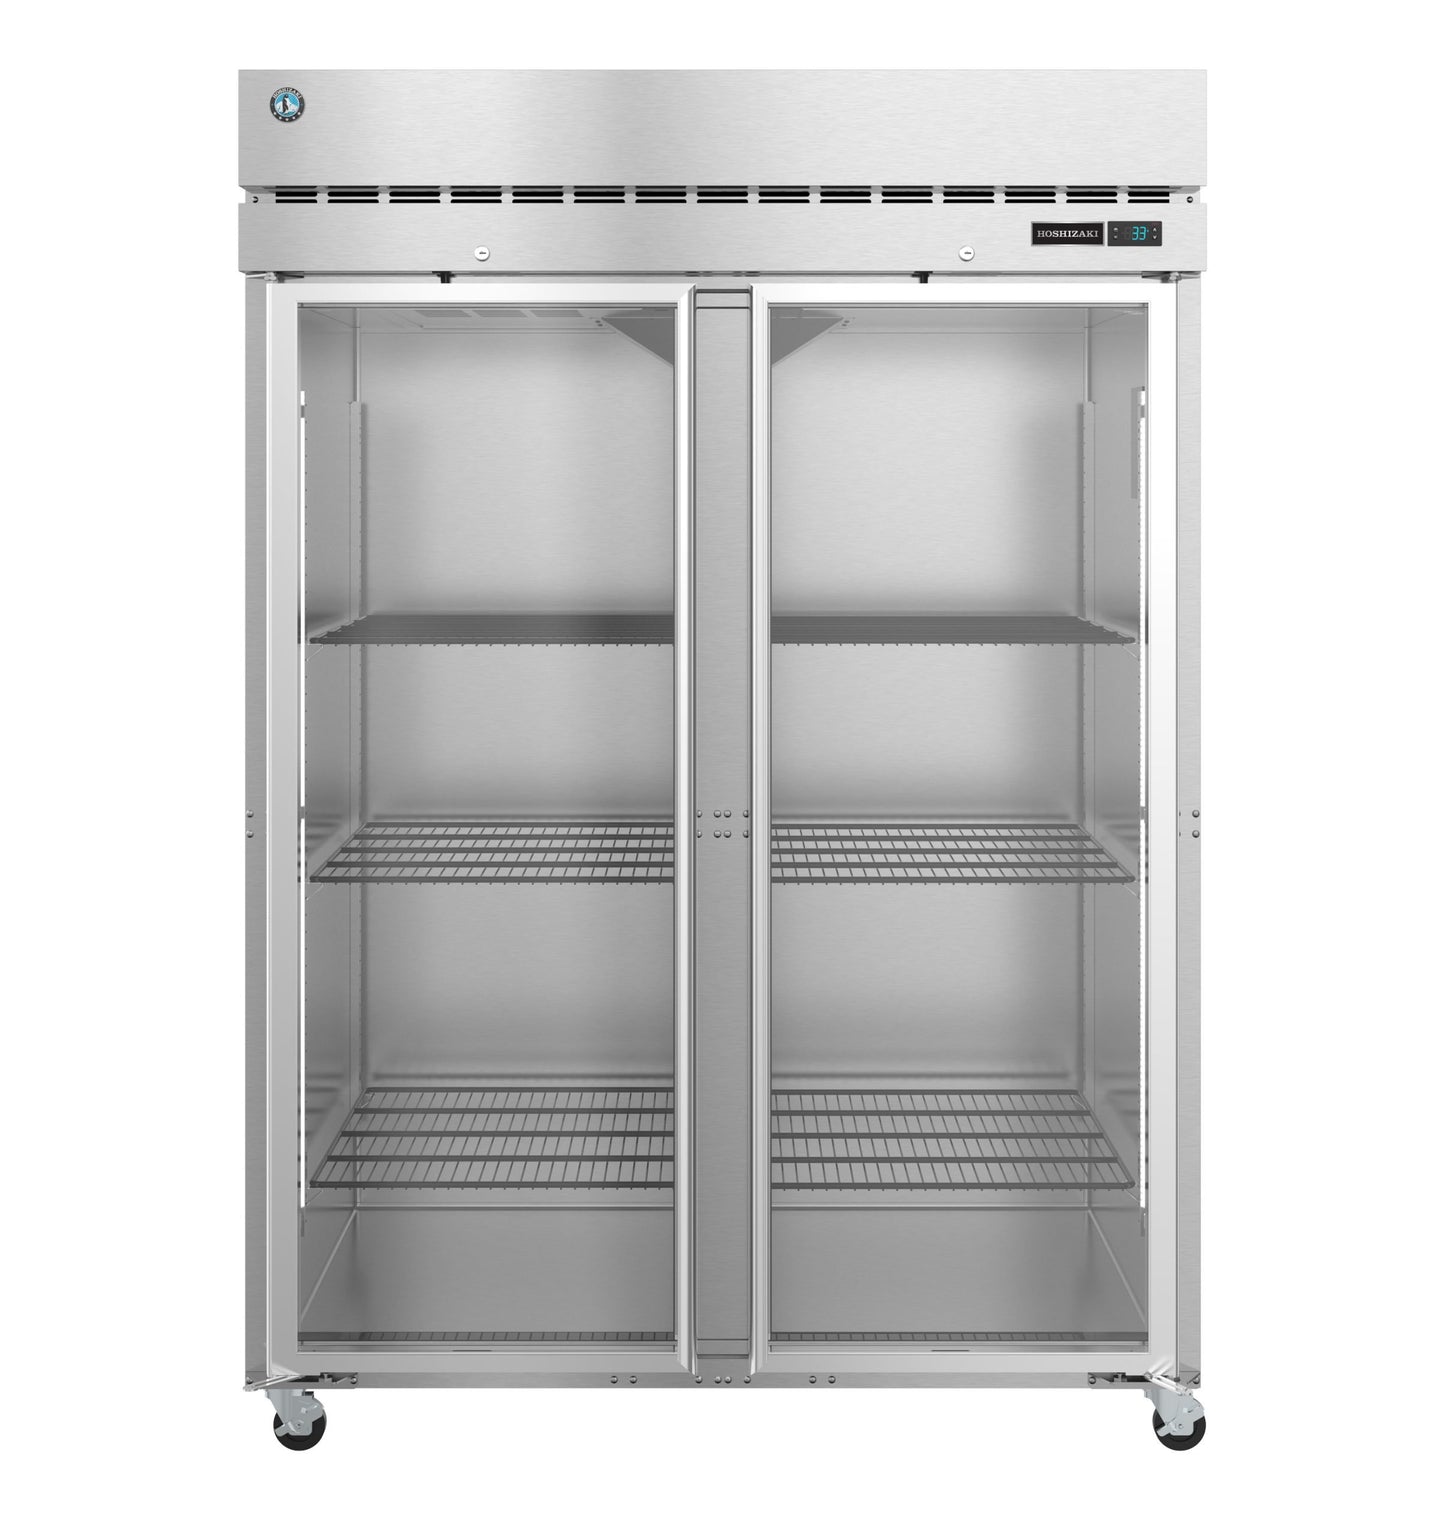 F2A-FG, Freezer, Two Section Upright, Full Glass Doors with Lock